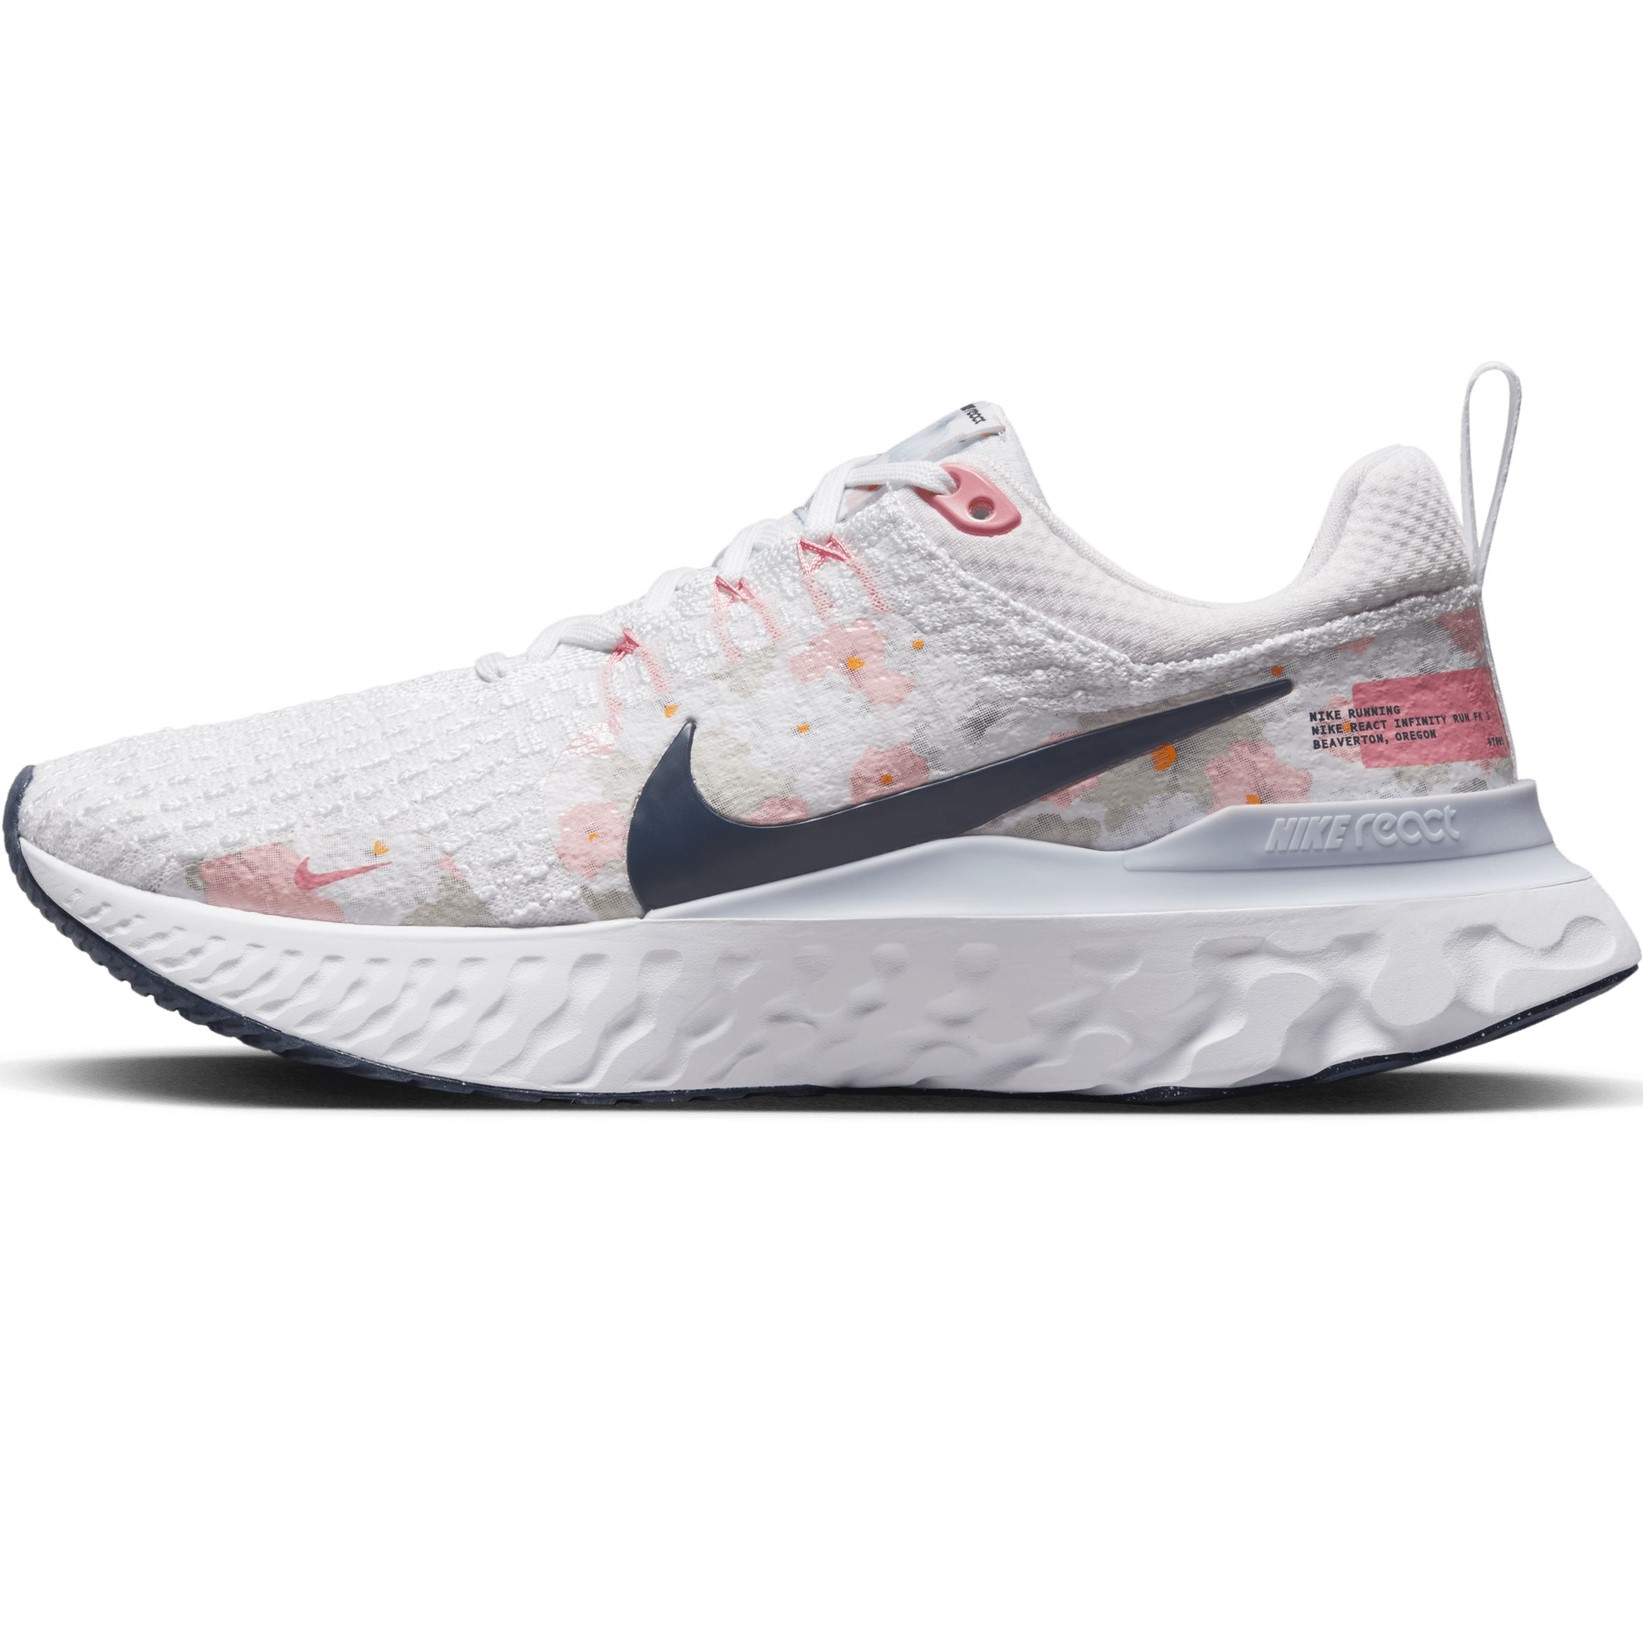 GIÀY THỂ THAO NIKE NỮ REACT INFINITY 3 PREMIUM WHITE PEARL PINK WOMENS ROAD RUNNING SHOES FD4151-100 5